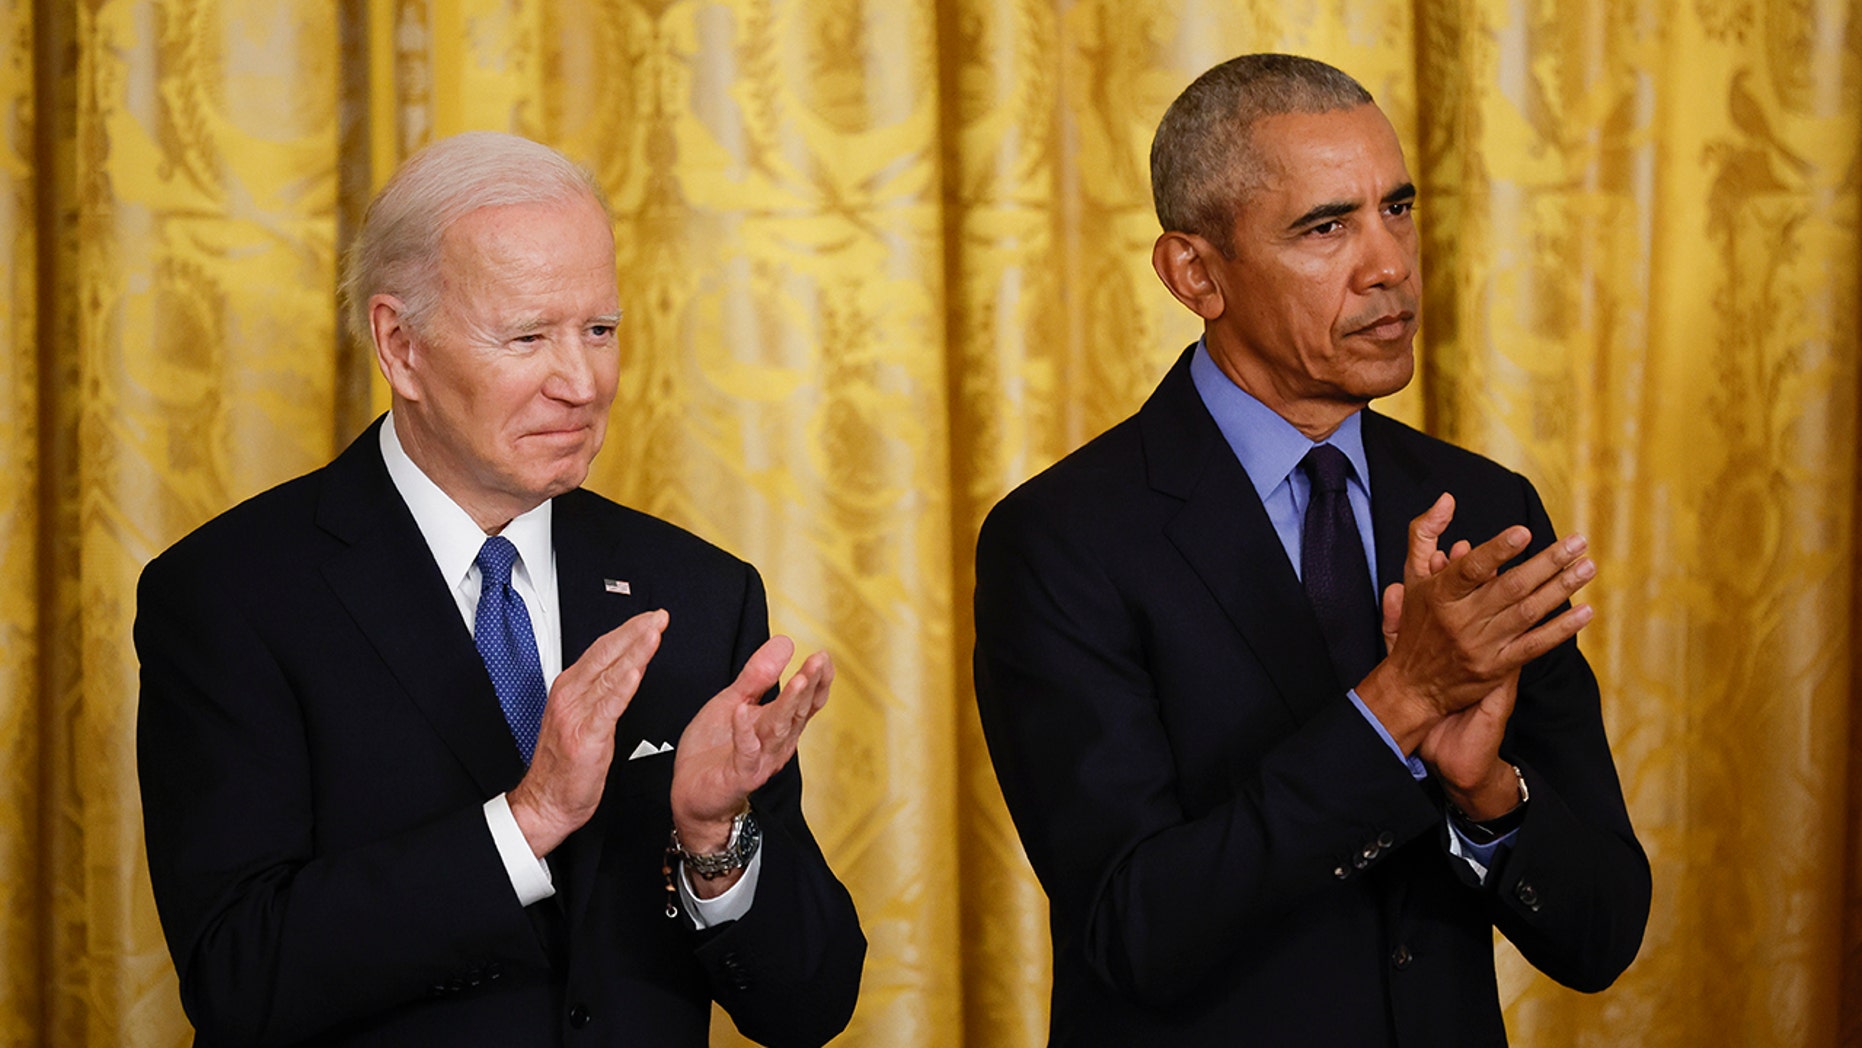 Biden and Obama sharing a stage, clapping their hands